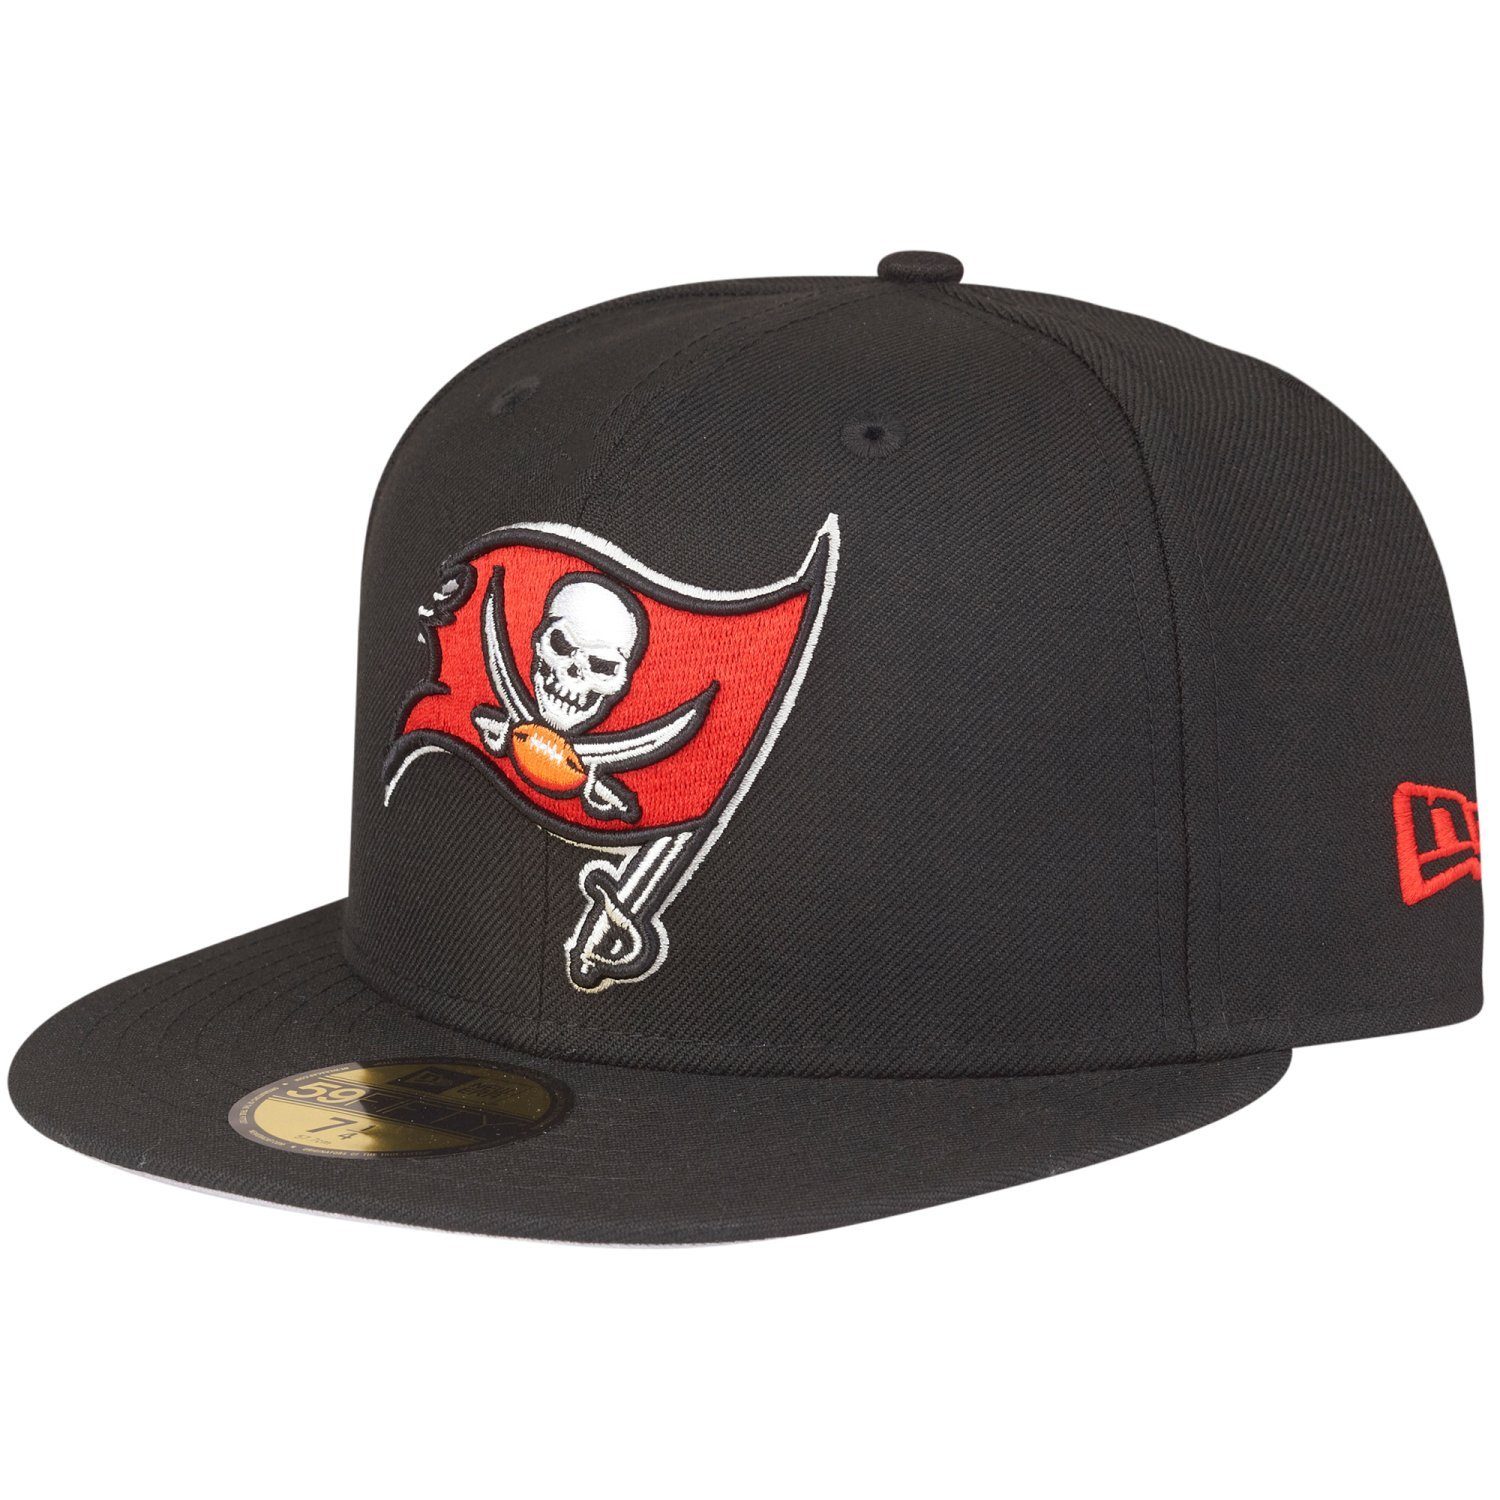 New Era Fitted Cap 59Fifty Bay NFL Buccaneers Tampa